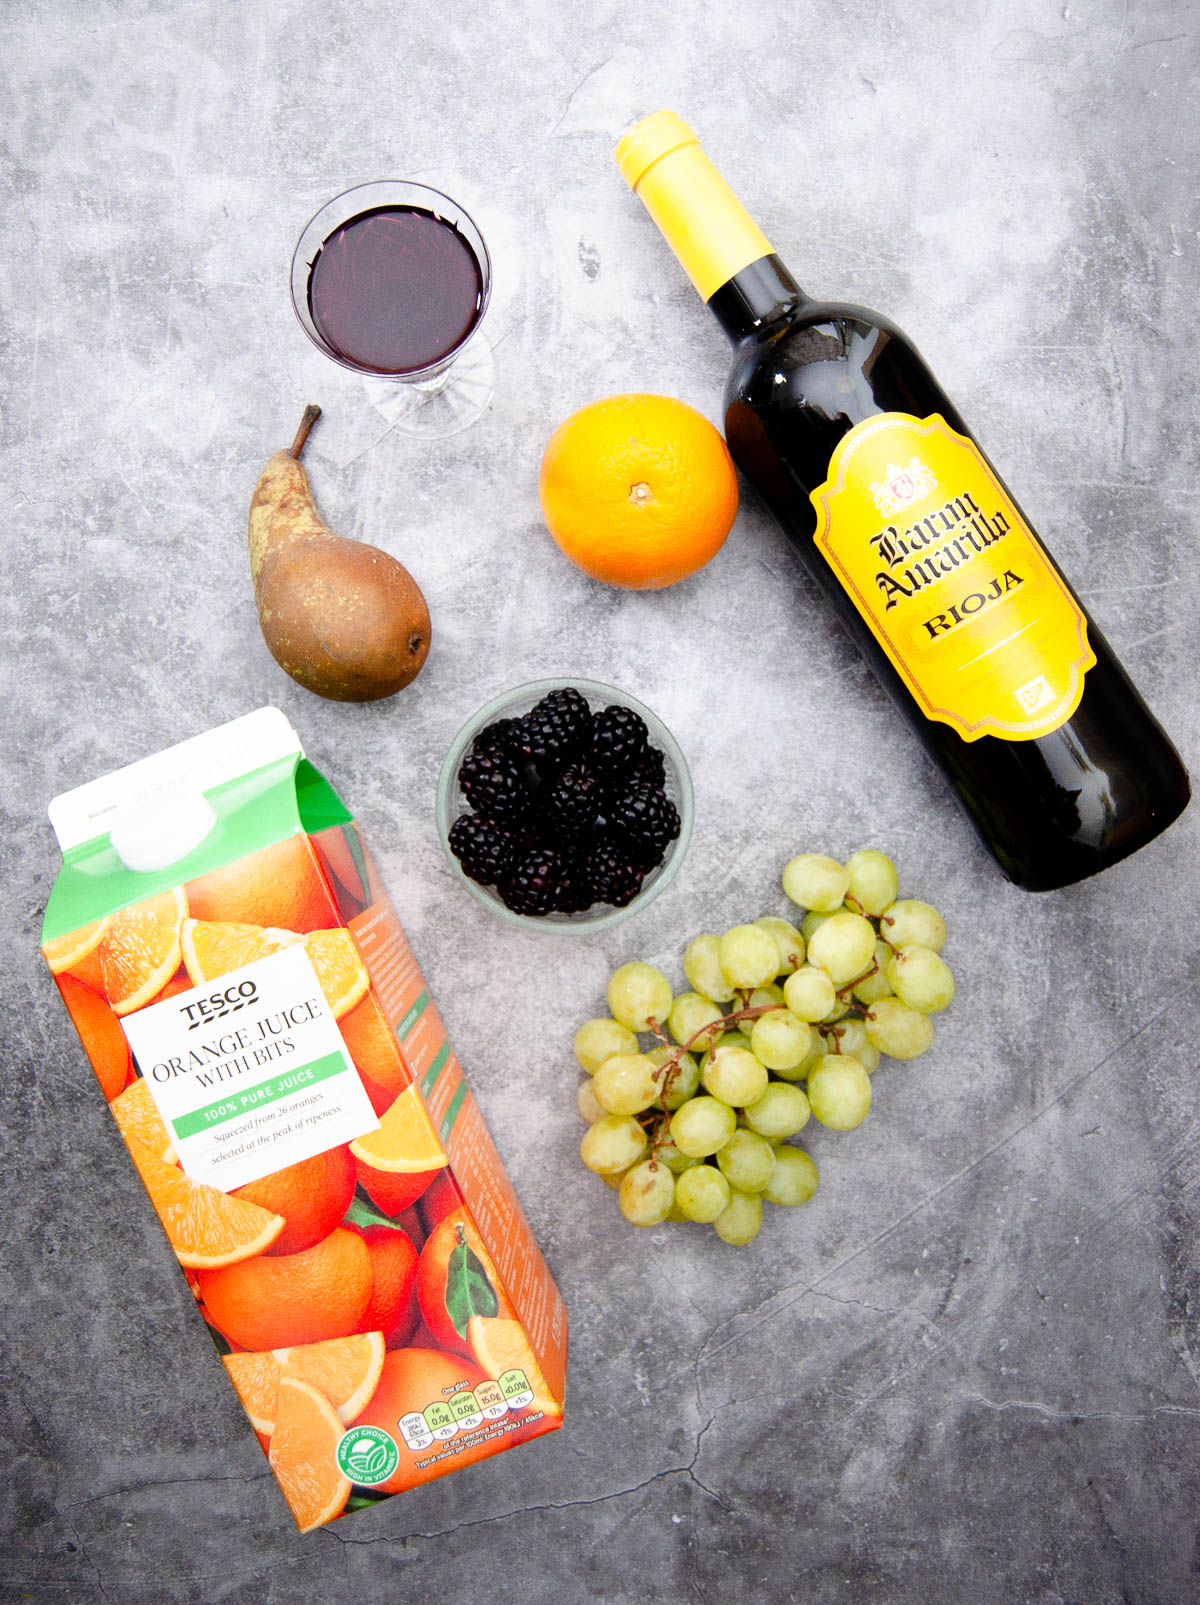 A top down photo of bottle of red wine, orange, bowl with blackberries, pear, green grapes, orange juice and syrup in a glass.